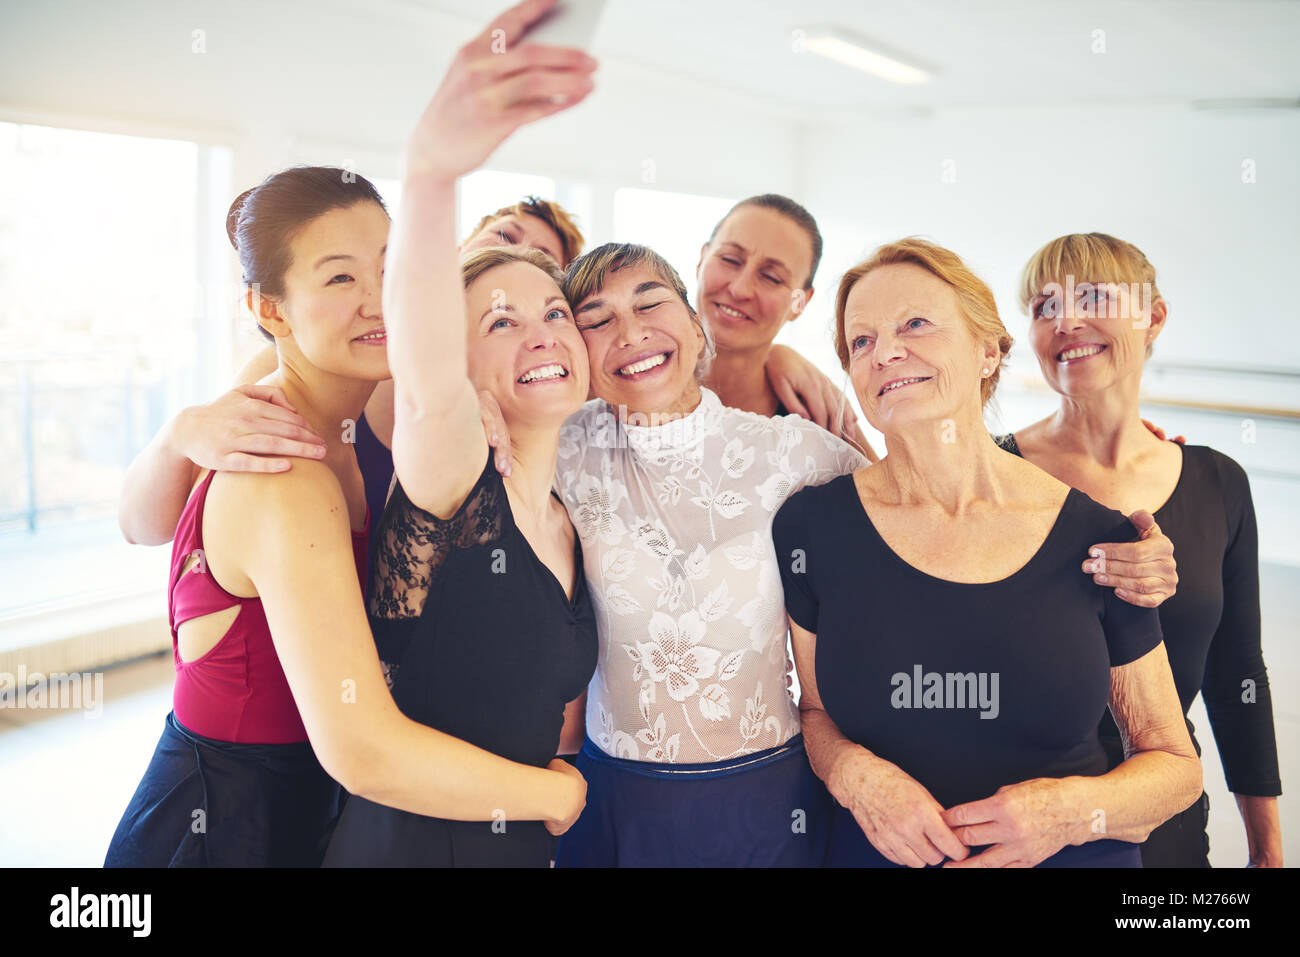 Mixed age group of smiling women standing arm in arm together in a dance studio taking a selfie Stock Photo